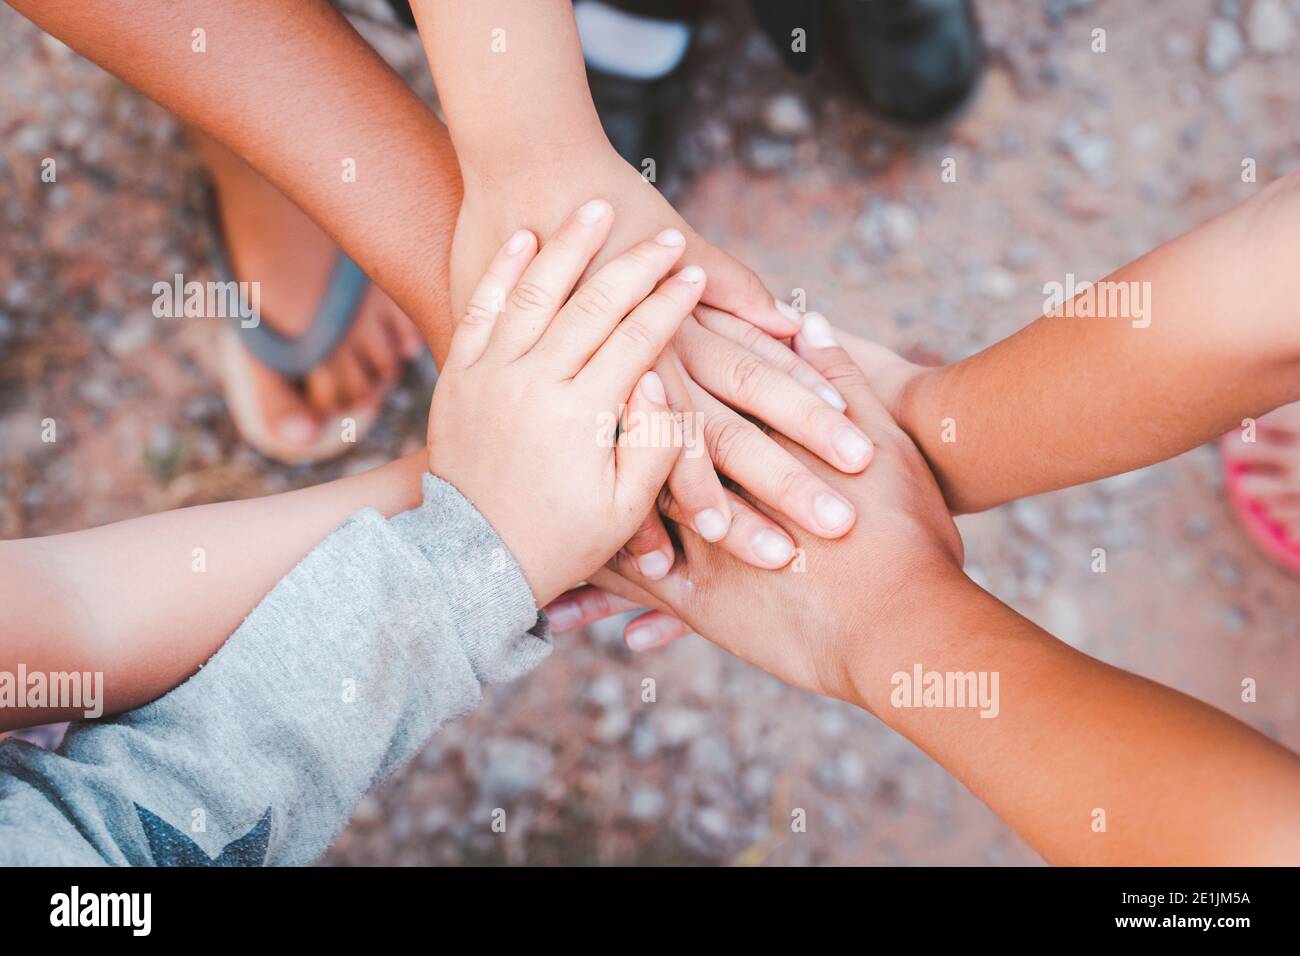 diverse hands joined together from child hand friendship Stock Photo